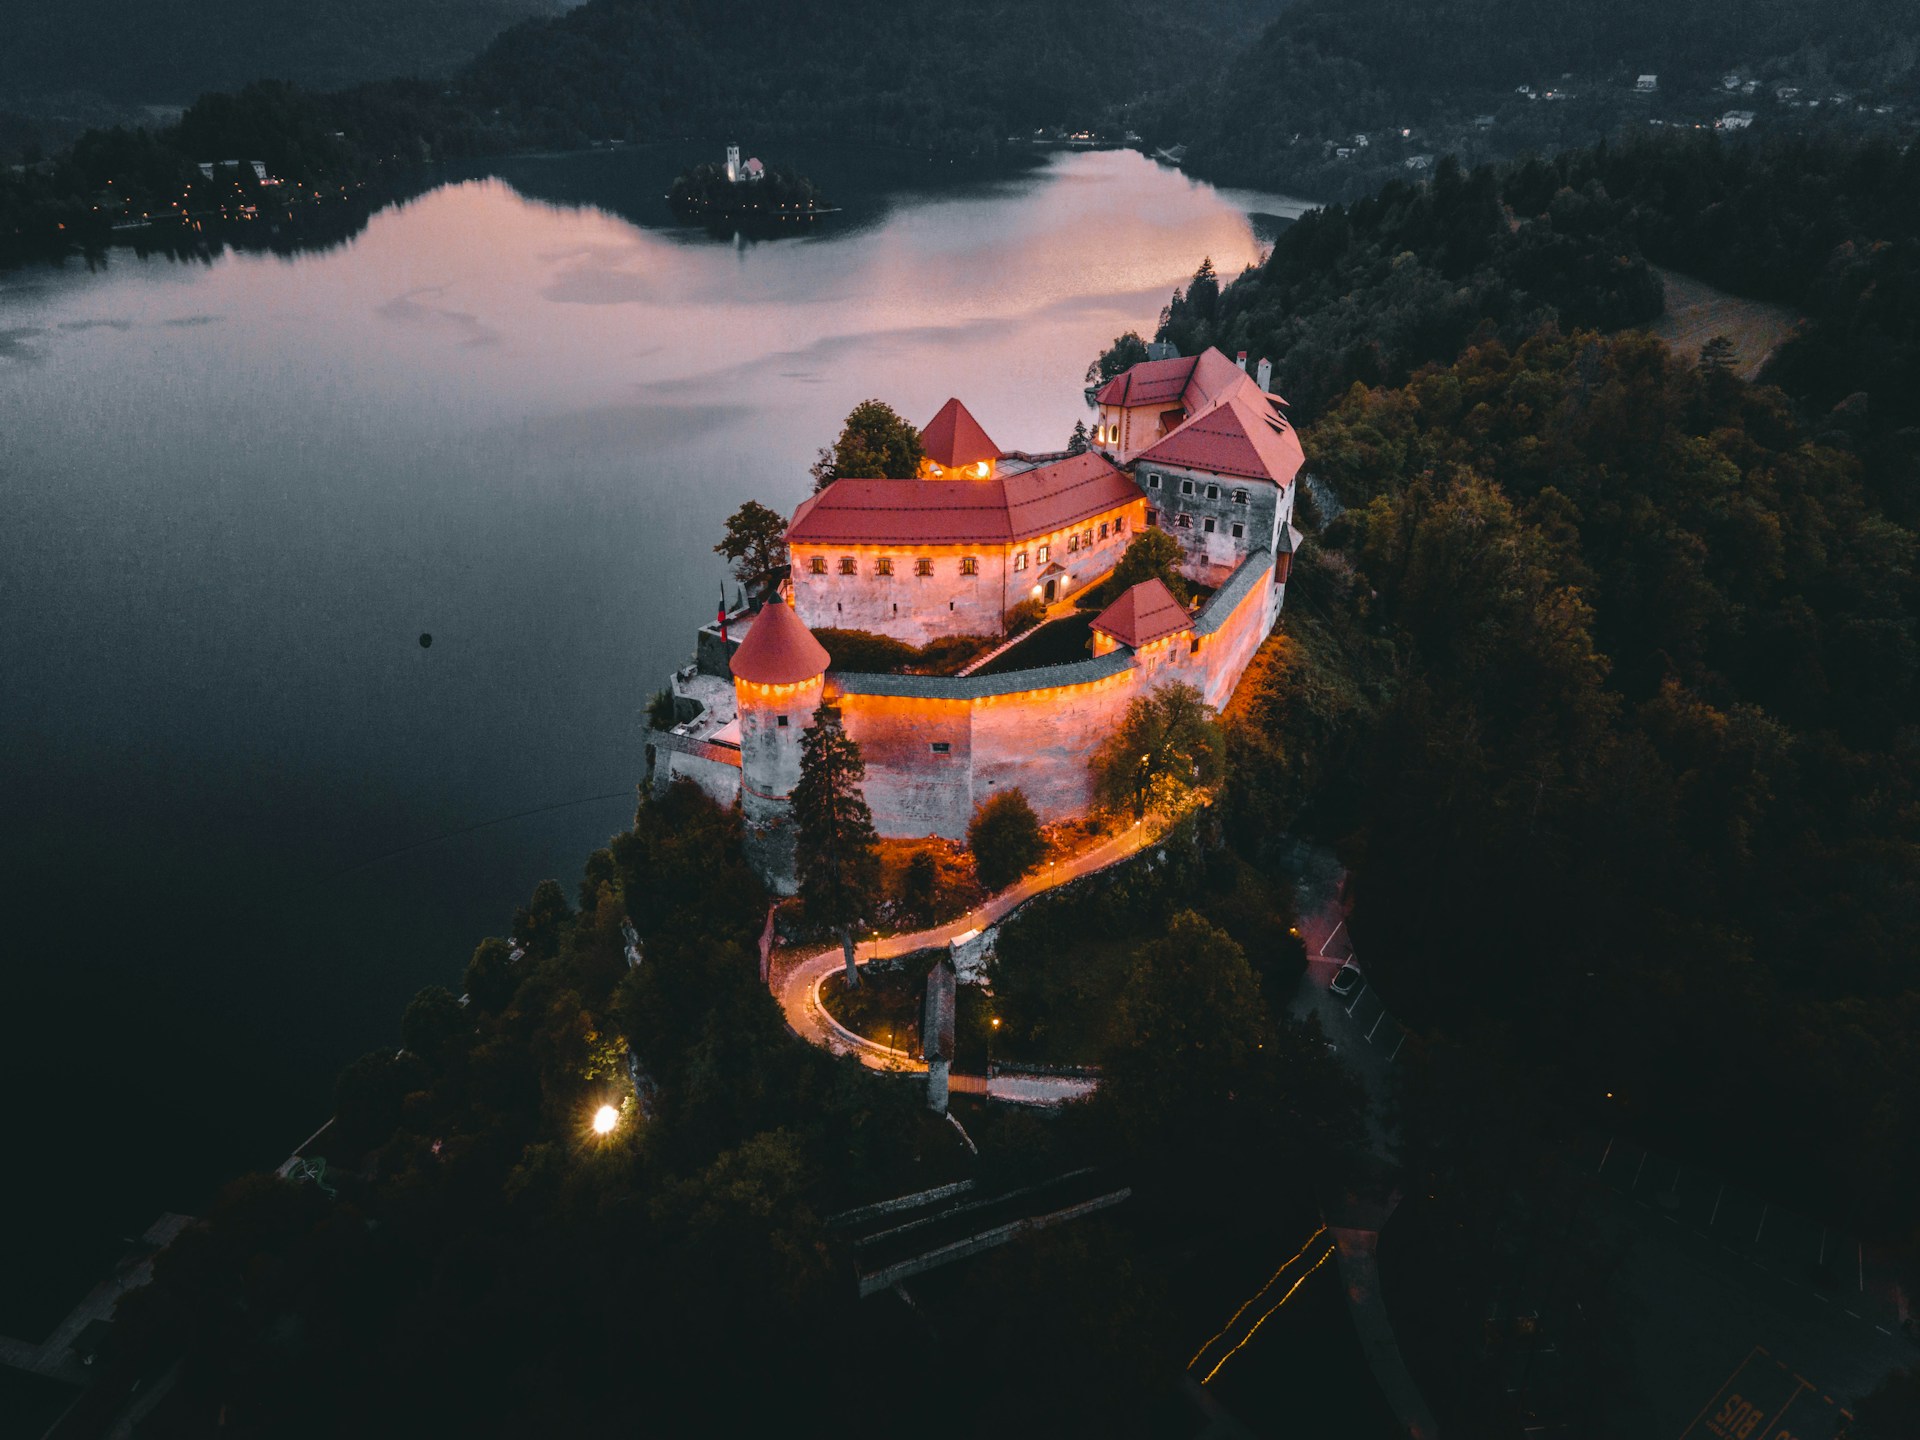 Bled castle at night